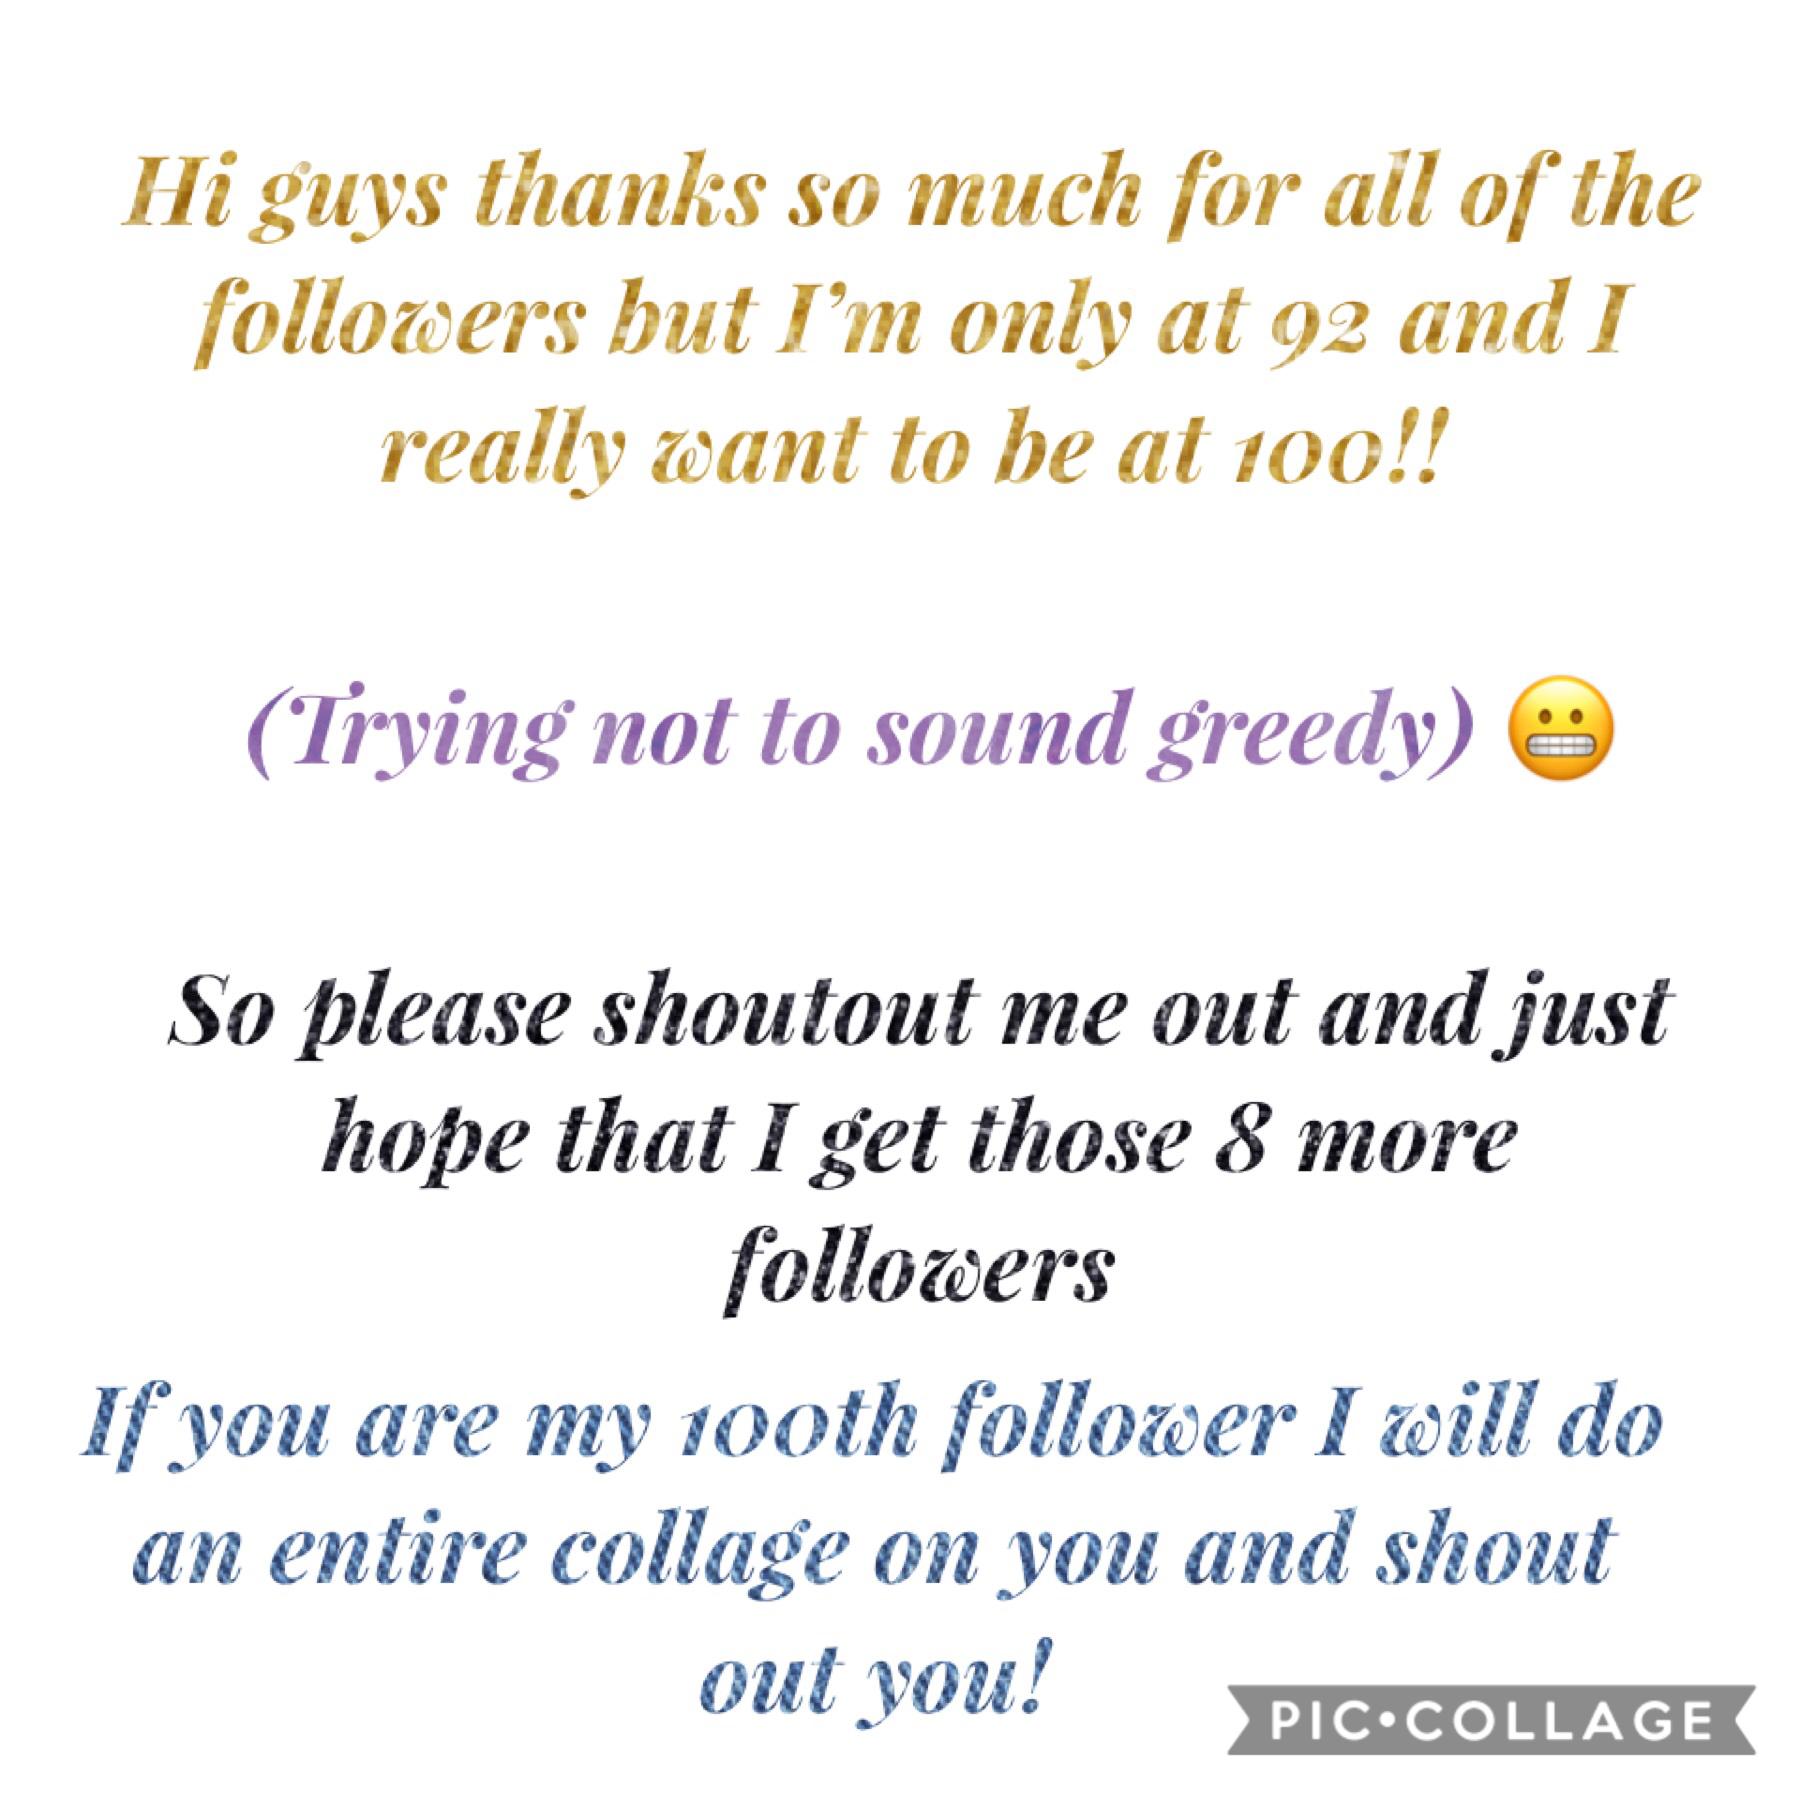 Tap* 
I’m so sorry if this sounded greedy I love and am so thankful for all of my followers 💖